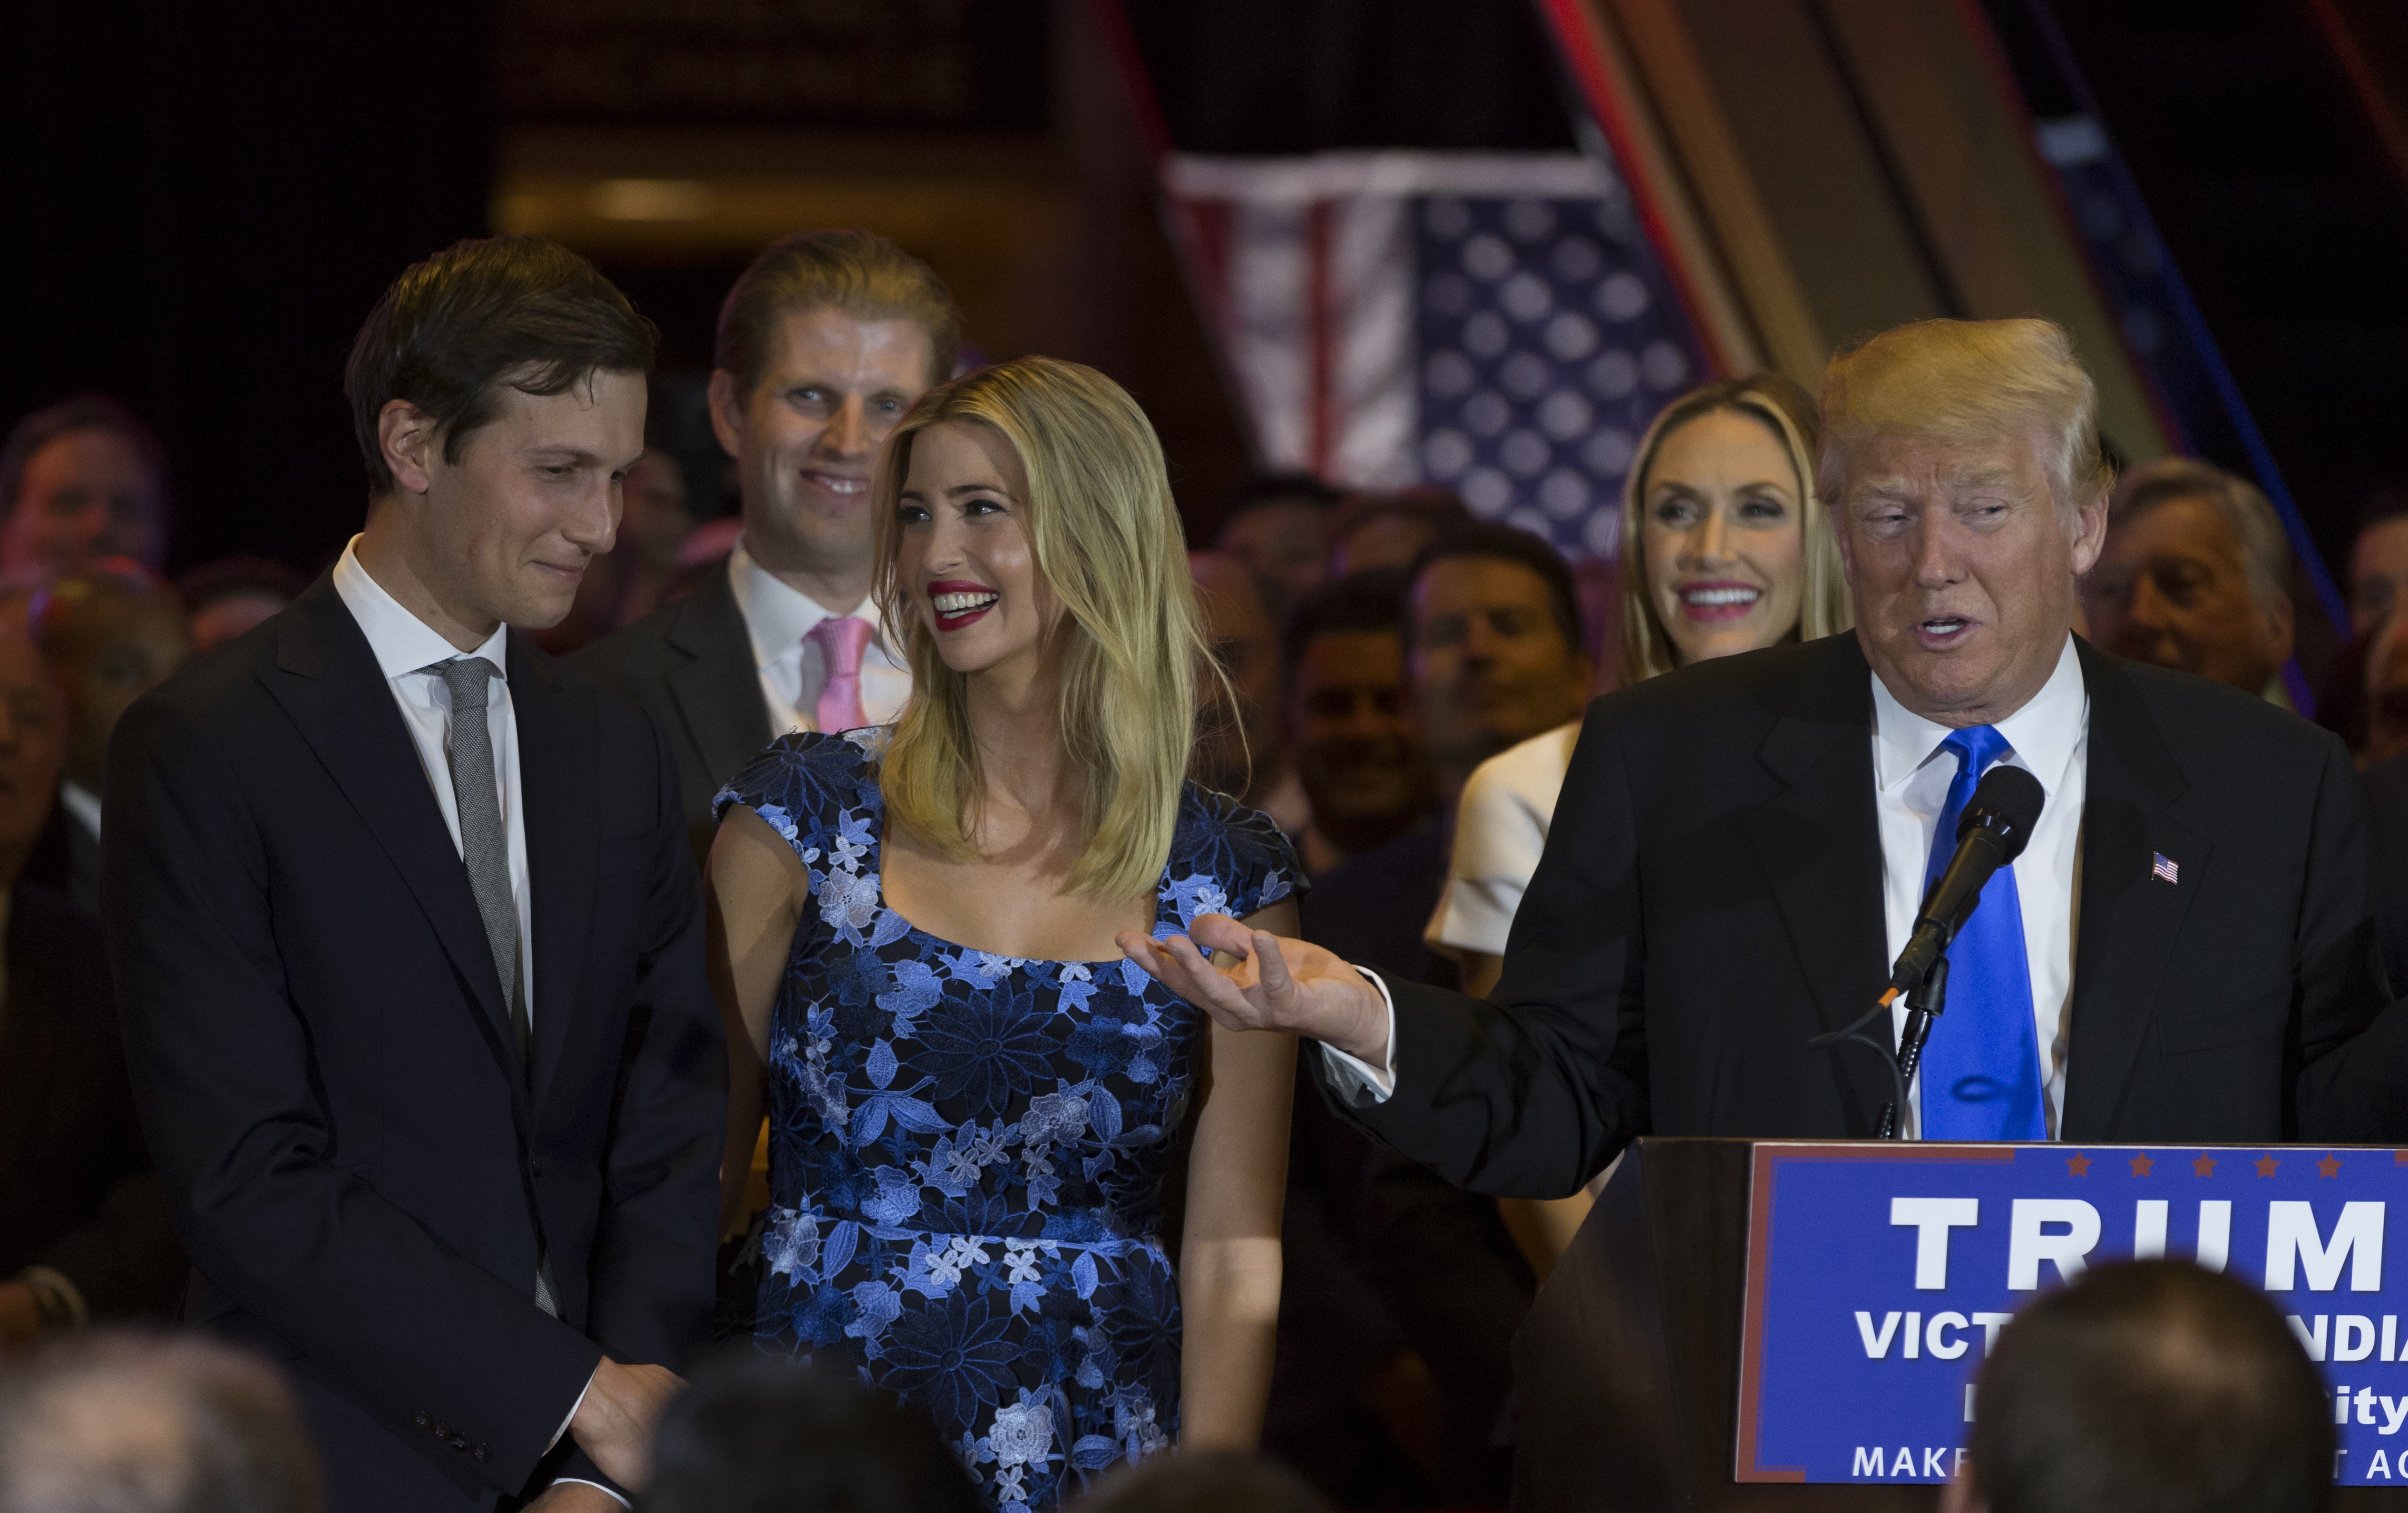 Trump Nearly Expelled Ivanka, Jared Kushner From White House With A Tweet, New Book Says